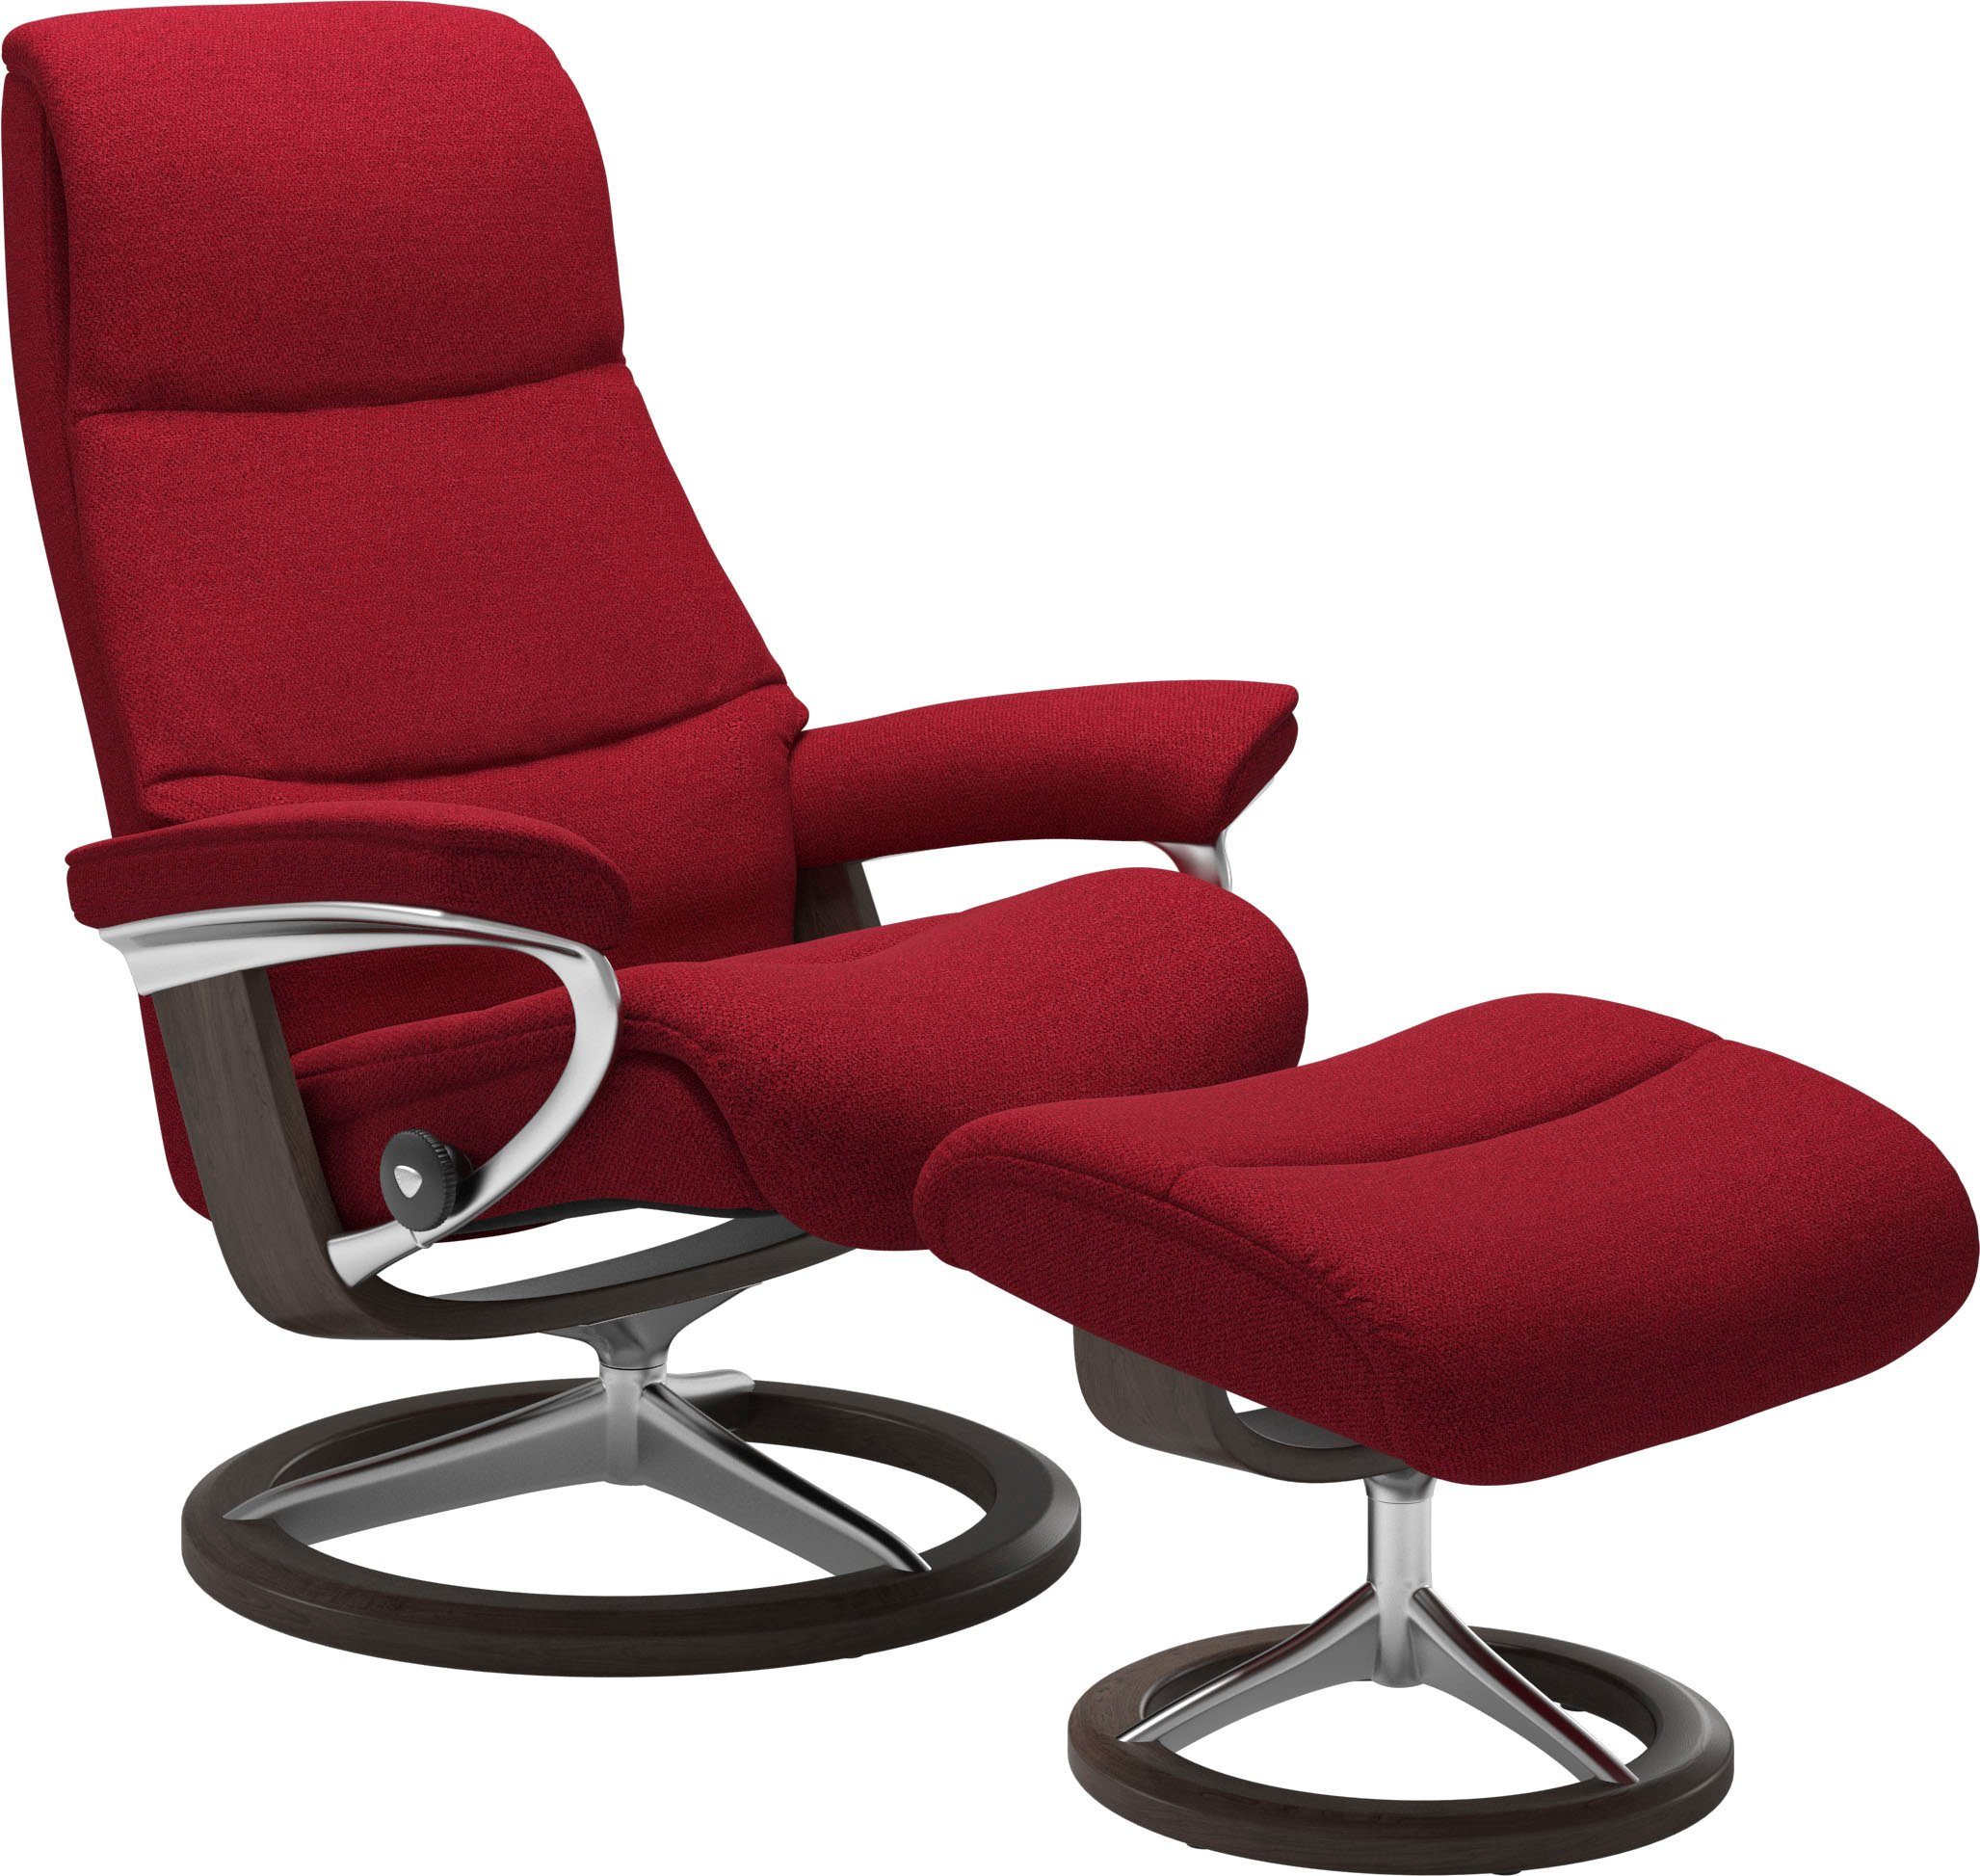 Signature View, Relaxsessel L,Gestell Wenge Größe mit Stressless® Base,